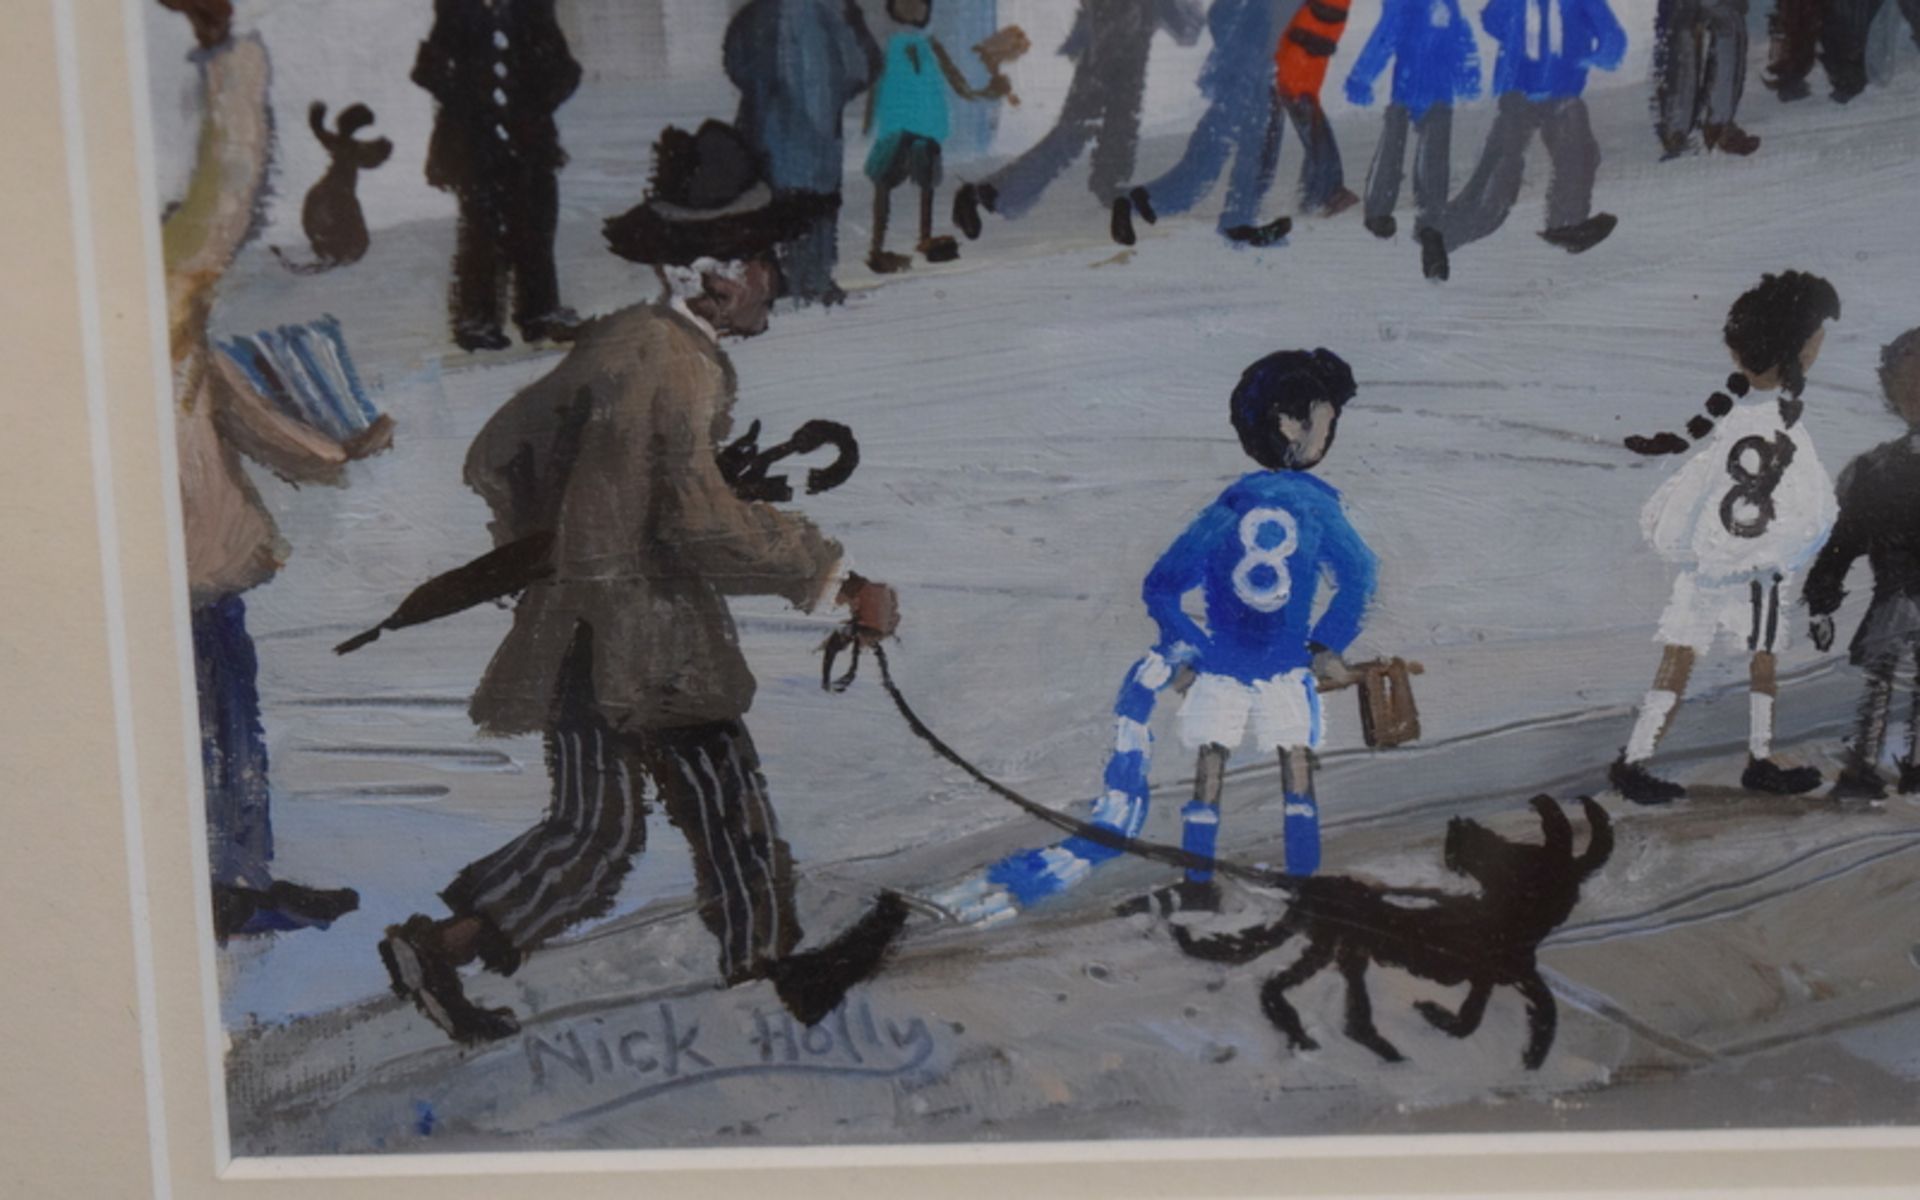 Original Nick Holly Painting Of Cardiff City vs Real Madrid - Image 2 of 2